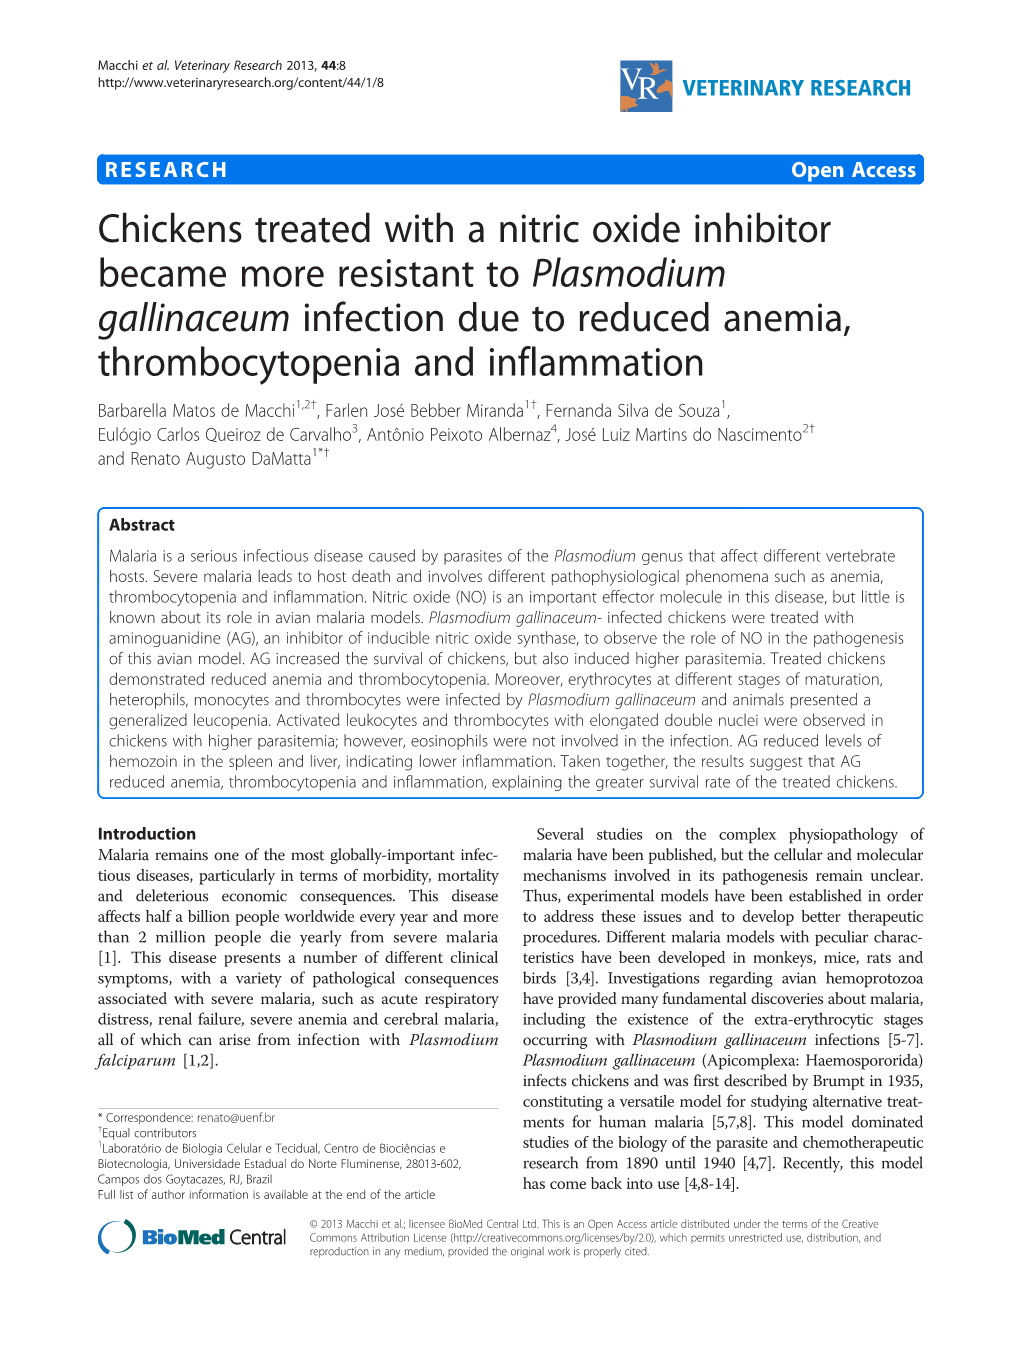 Chickens Treated with a Nitric Oxide Inhibitor